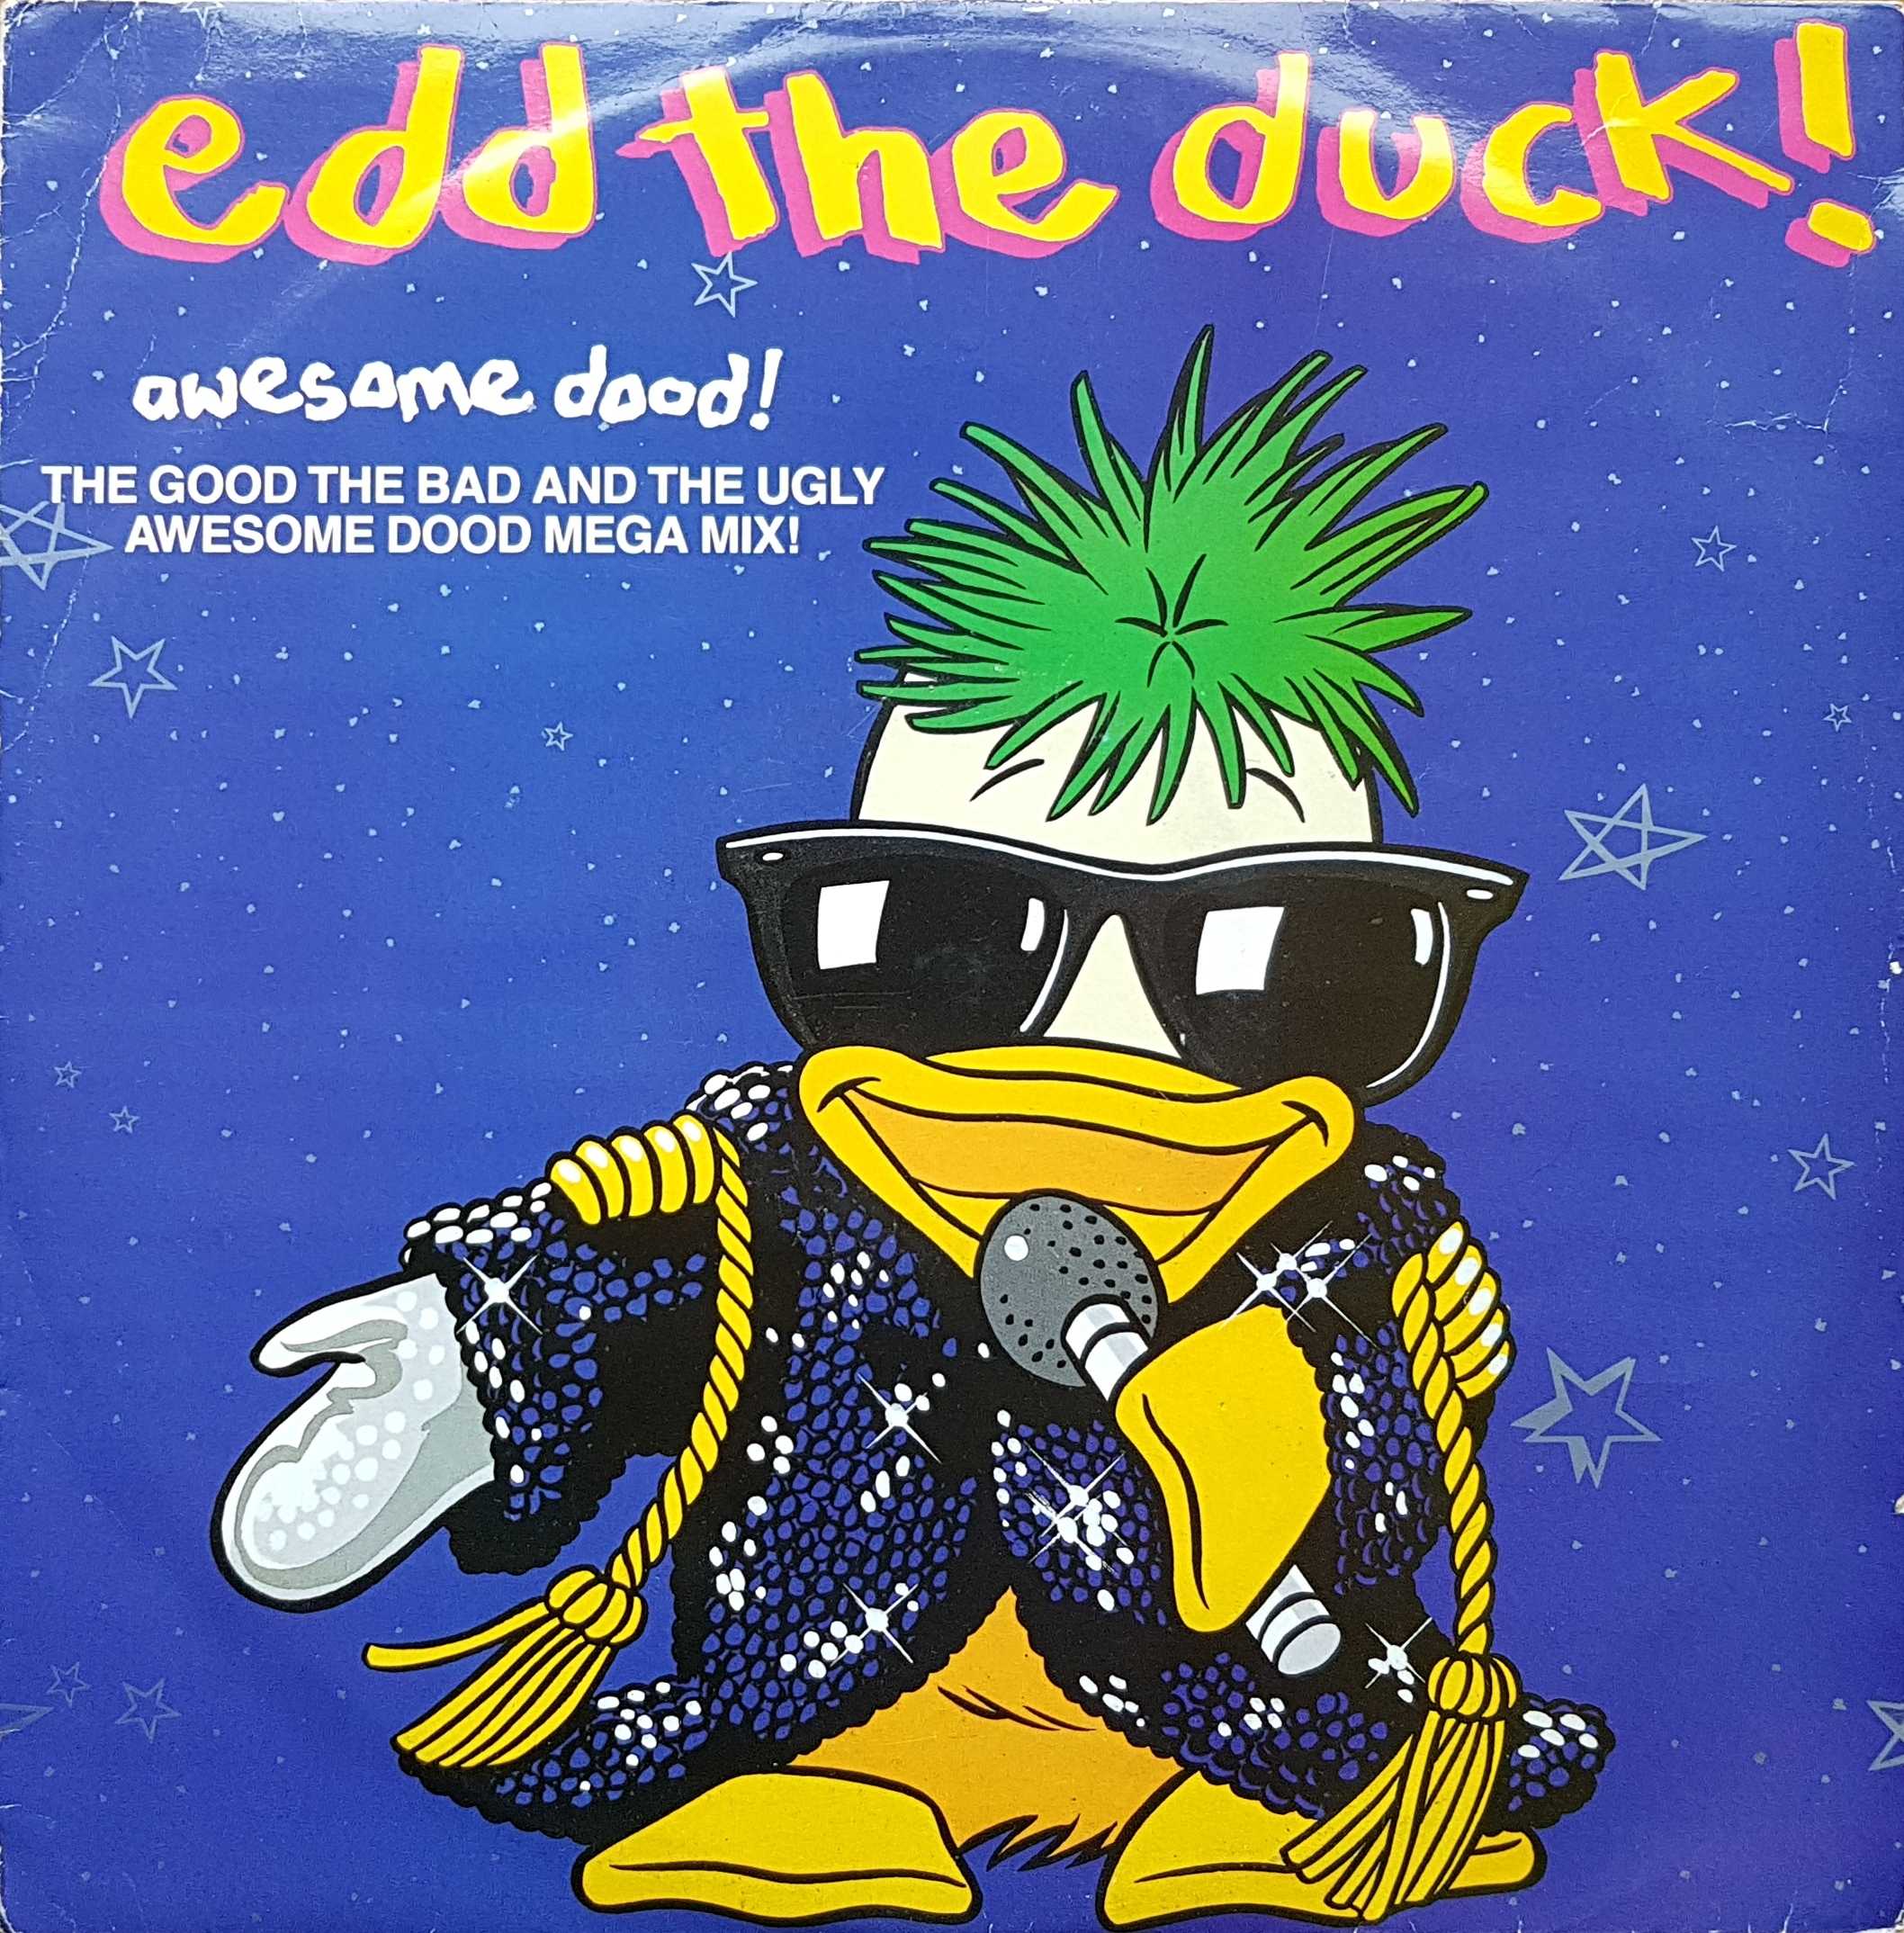 Picture of 12 RSL 001 Awesome dood ! by artist Roy Hamilton (Edd the duck) from the BBC 12inches - Records and Tapes library